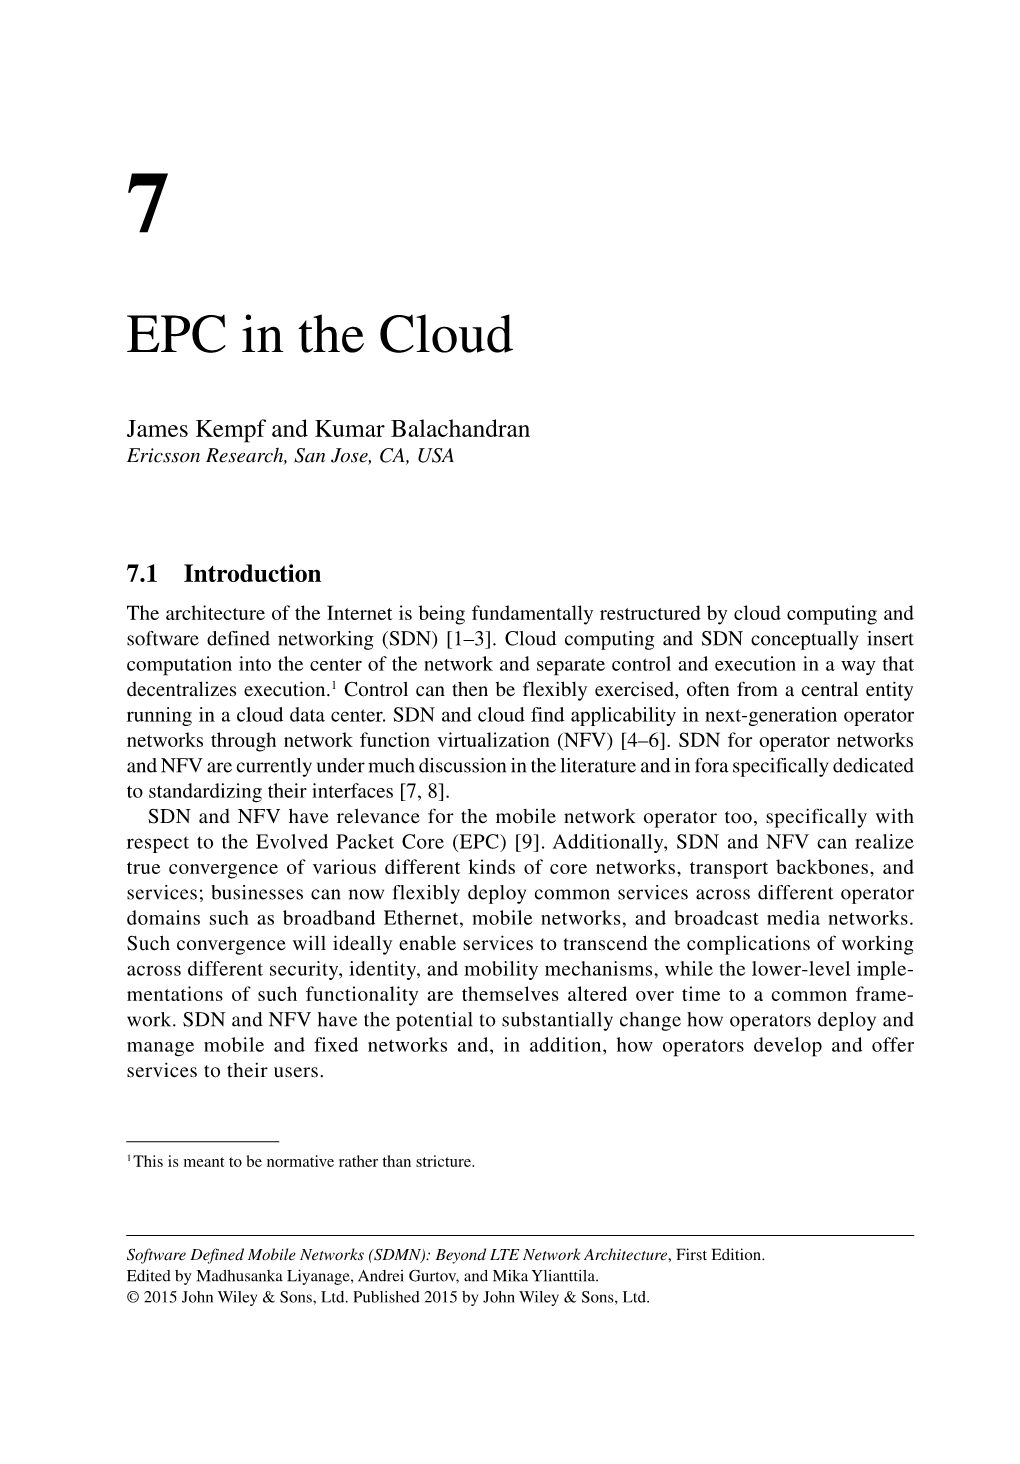 EPC in the Cloud